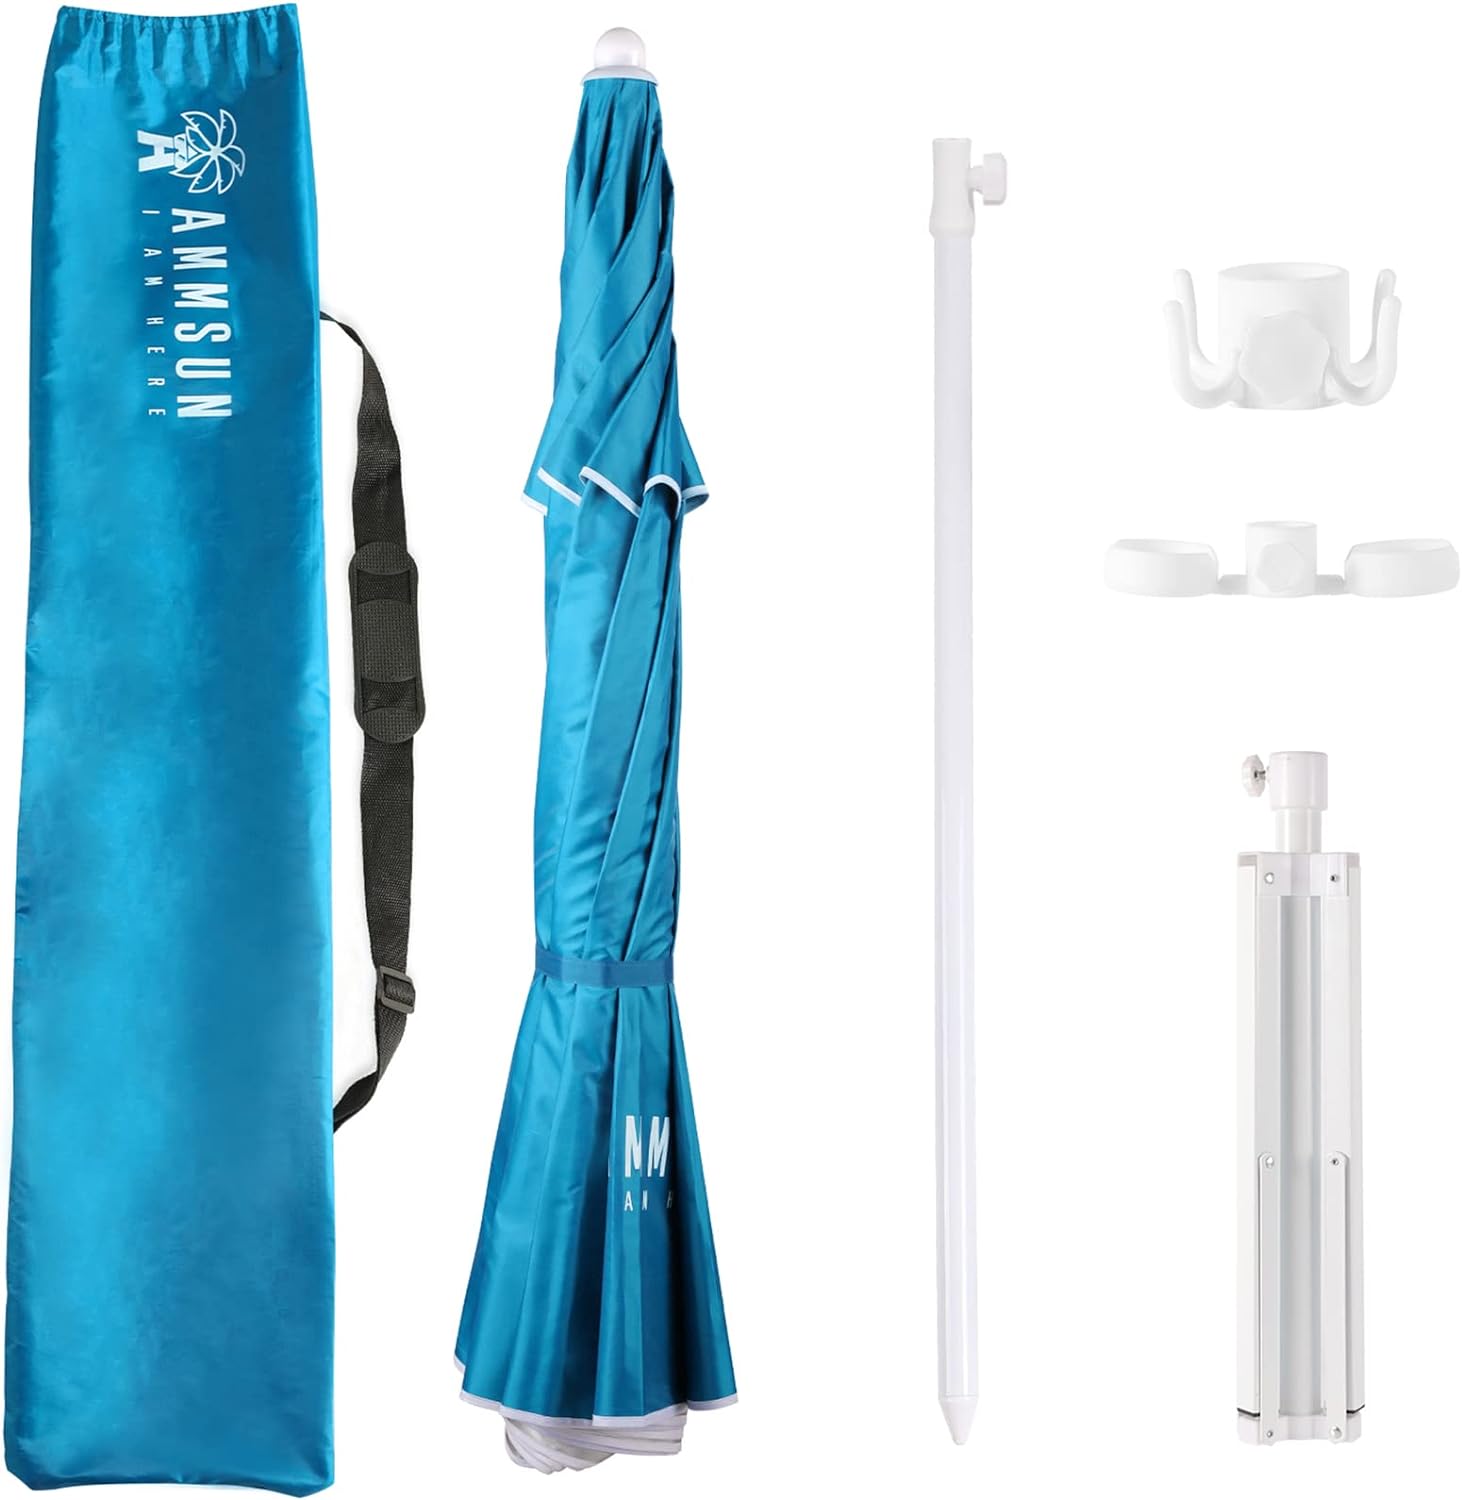 AMMSUN 6.5ft Lightweight Portable Sports Umbrella with Stand Sky Blue